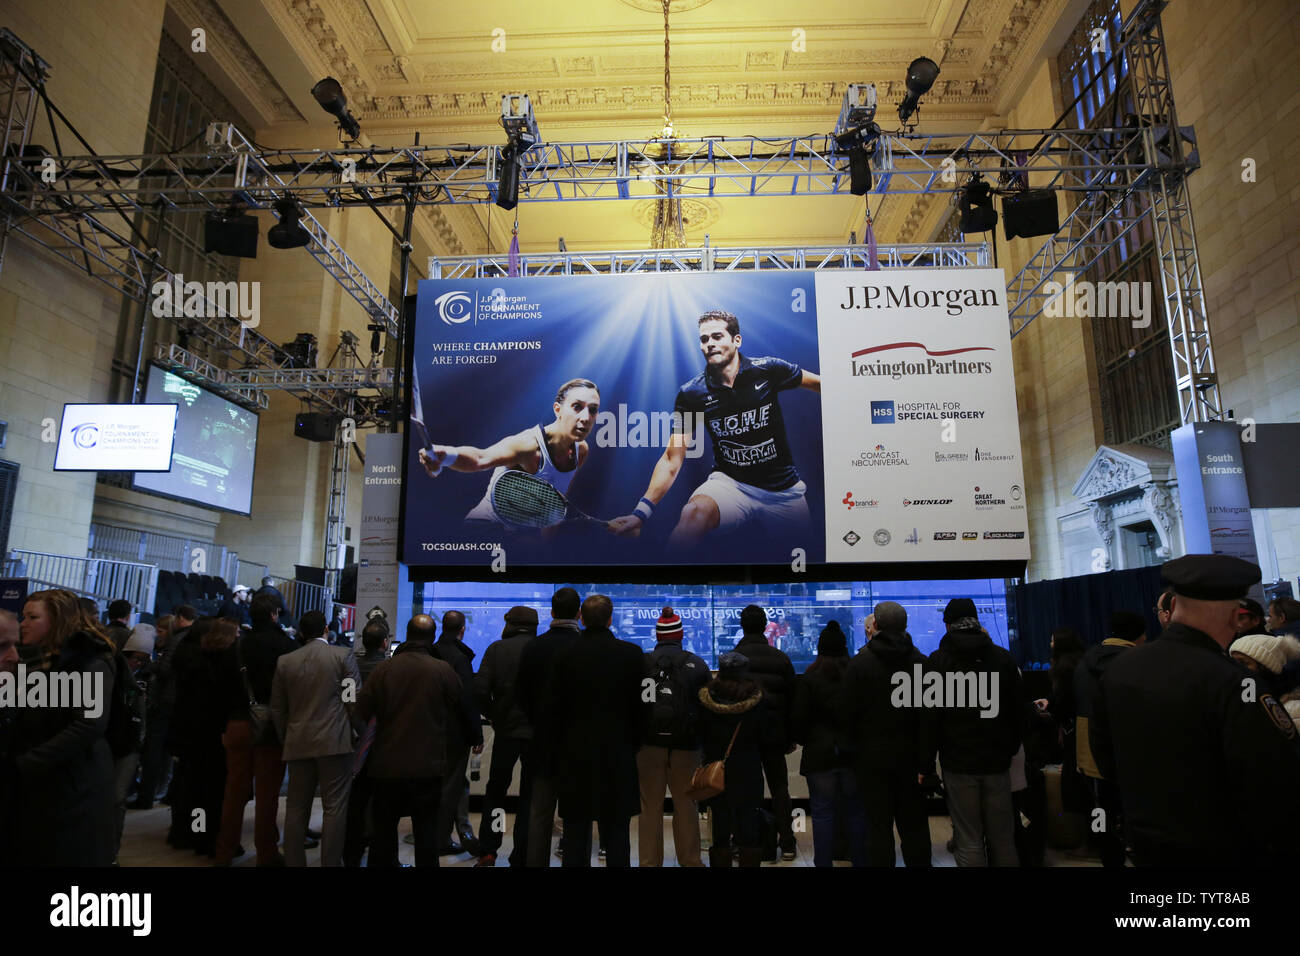 arbejder Betinget Egetræ Spectators stand in Vanderbilt Hall and watch the J.P. Morgan Tournament of  Champions Professional Squash Tournament in Grand Central Terminal in New  York City on January 18, 2018. The annual tournament is